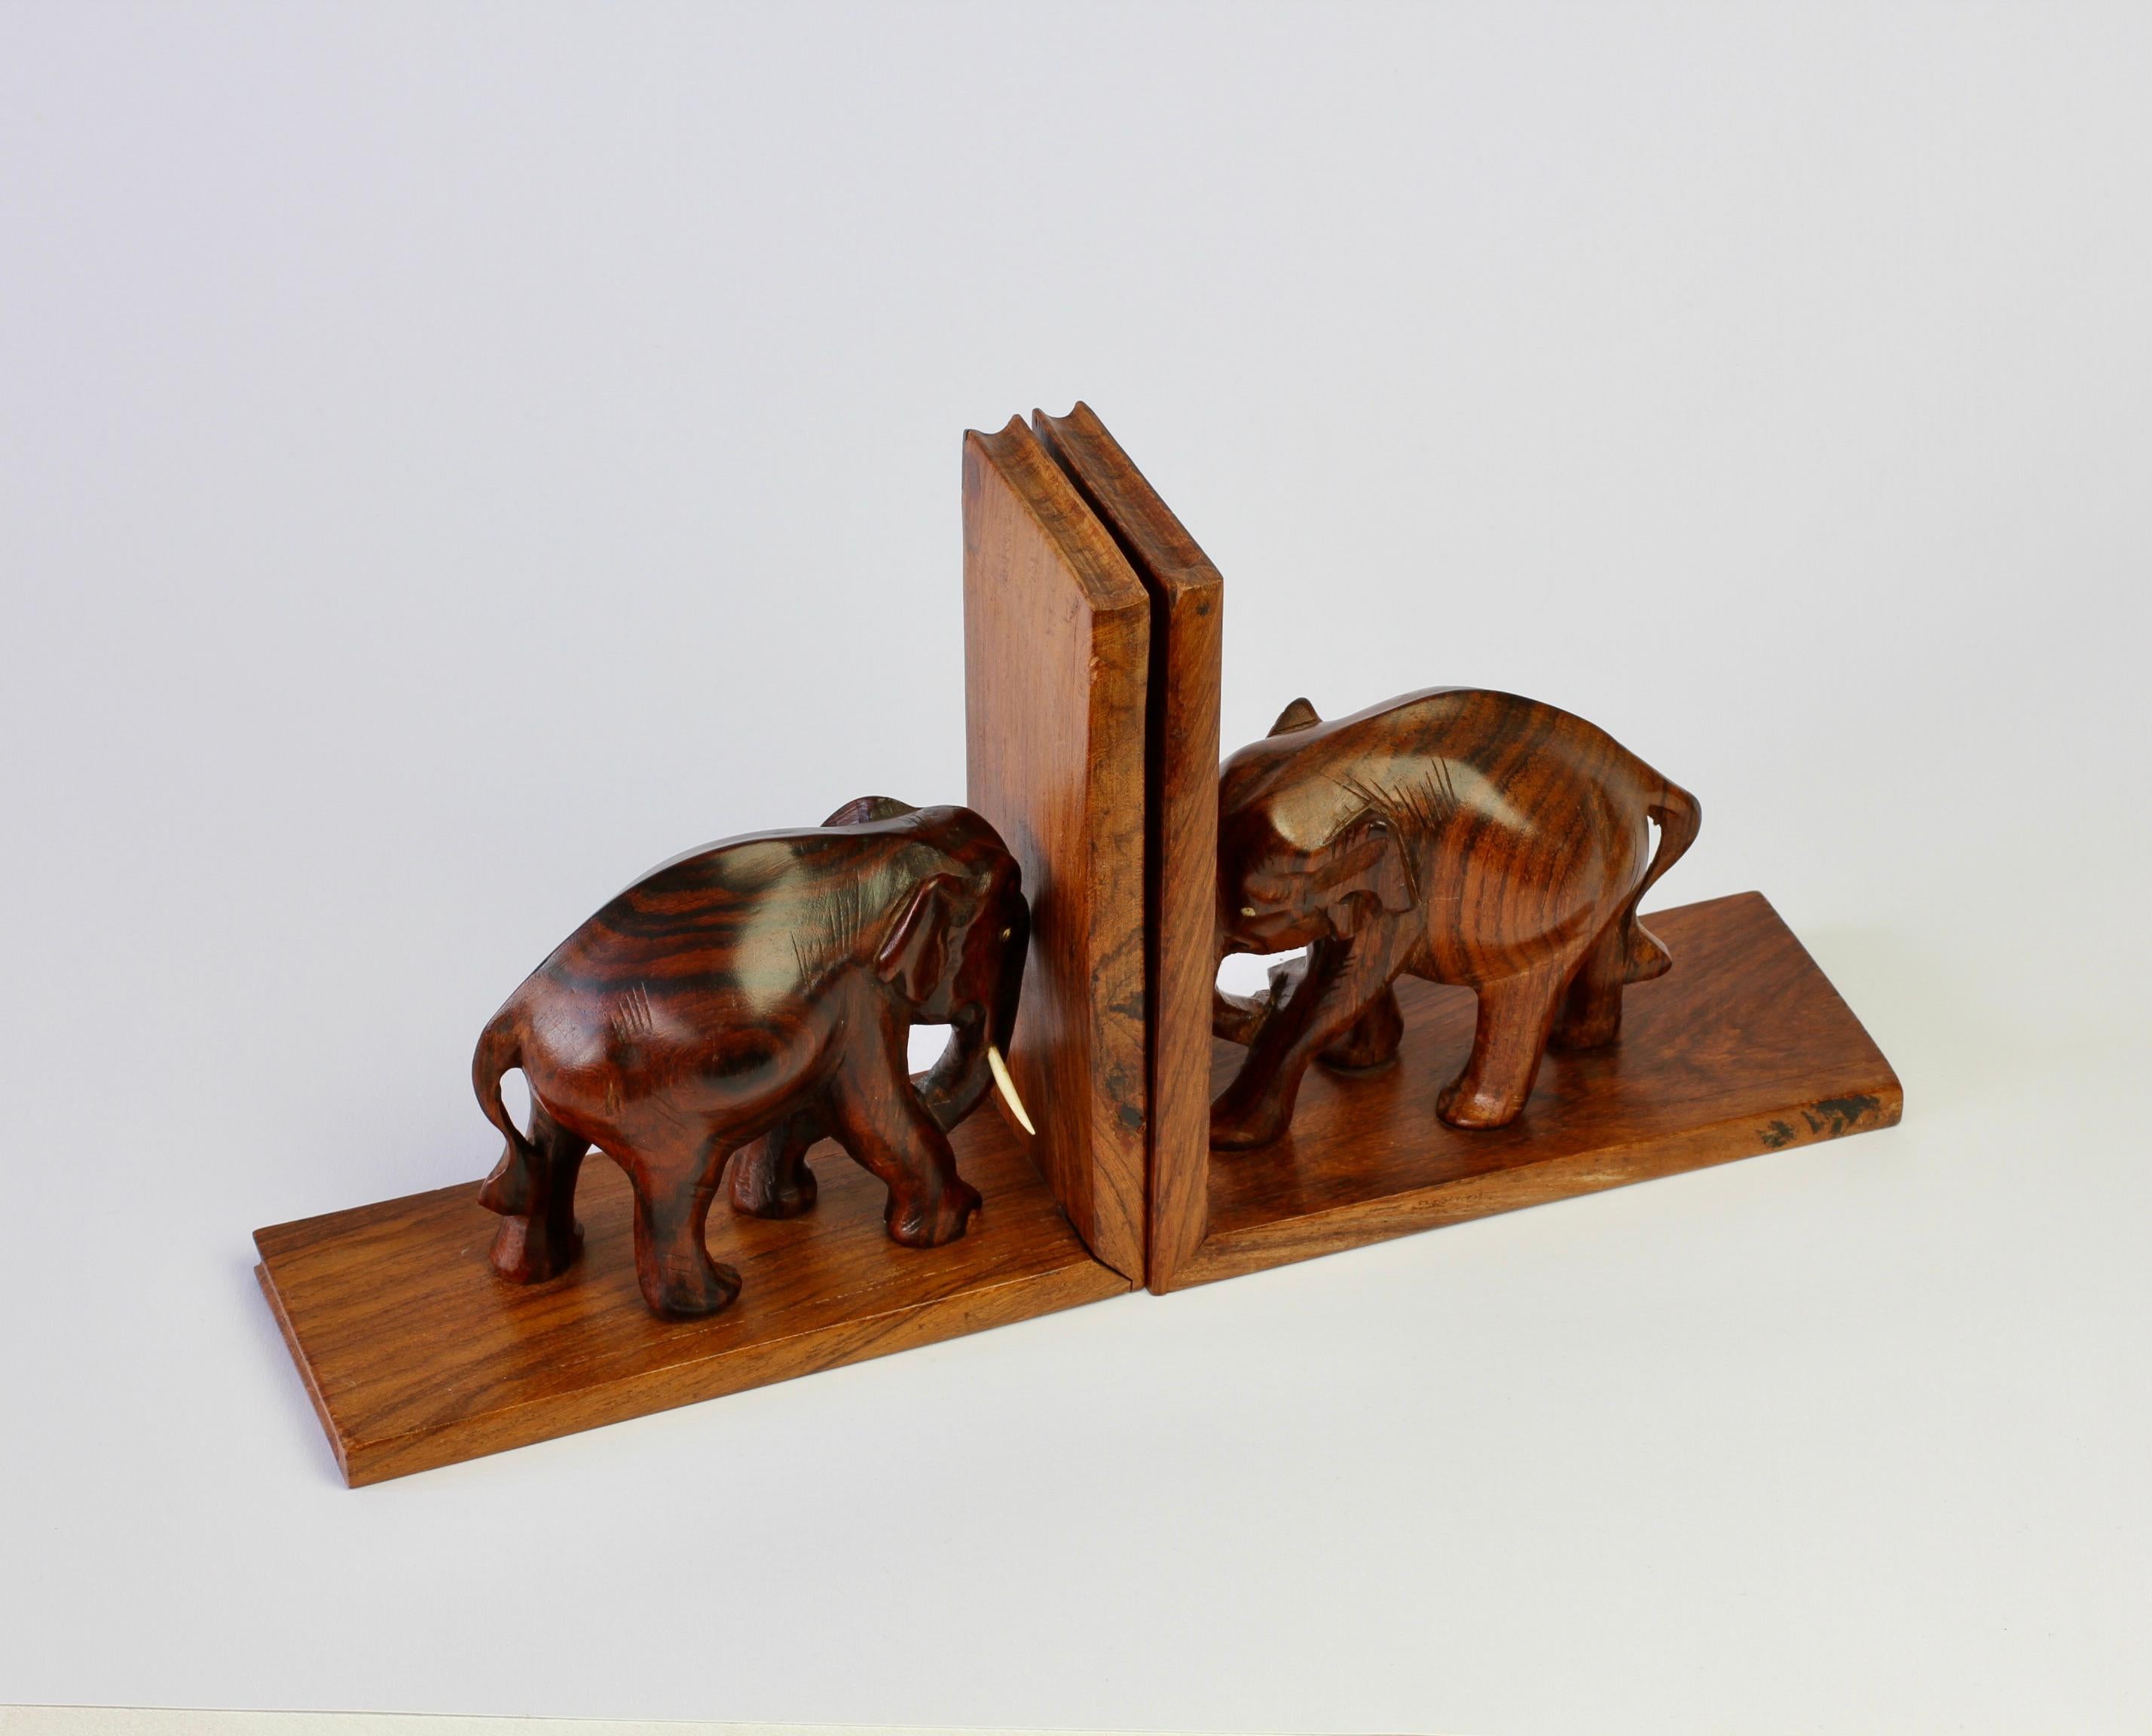 Hand Carved Wooden Book Ends with Elephant Sculptures / Figures, circa 1960s 1